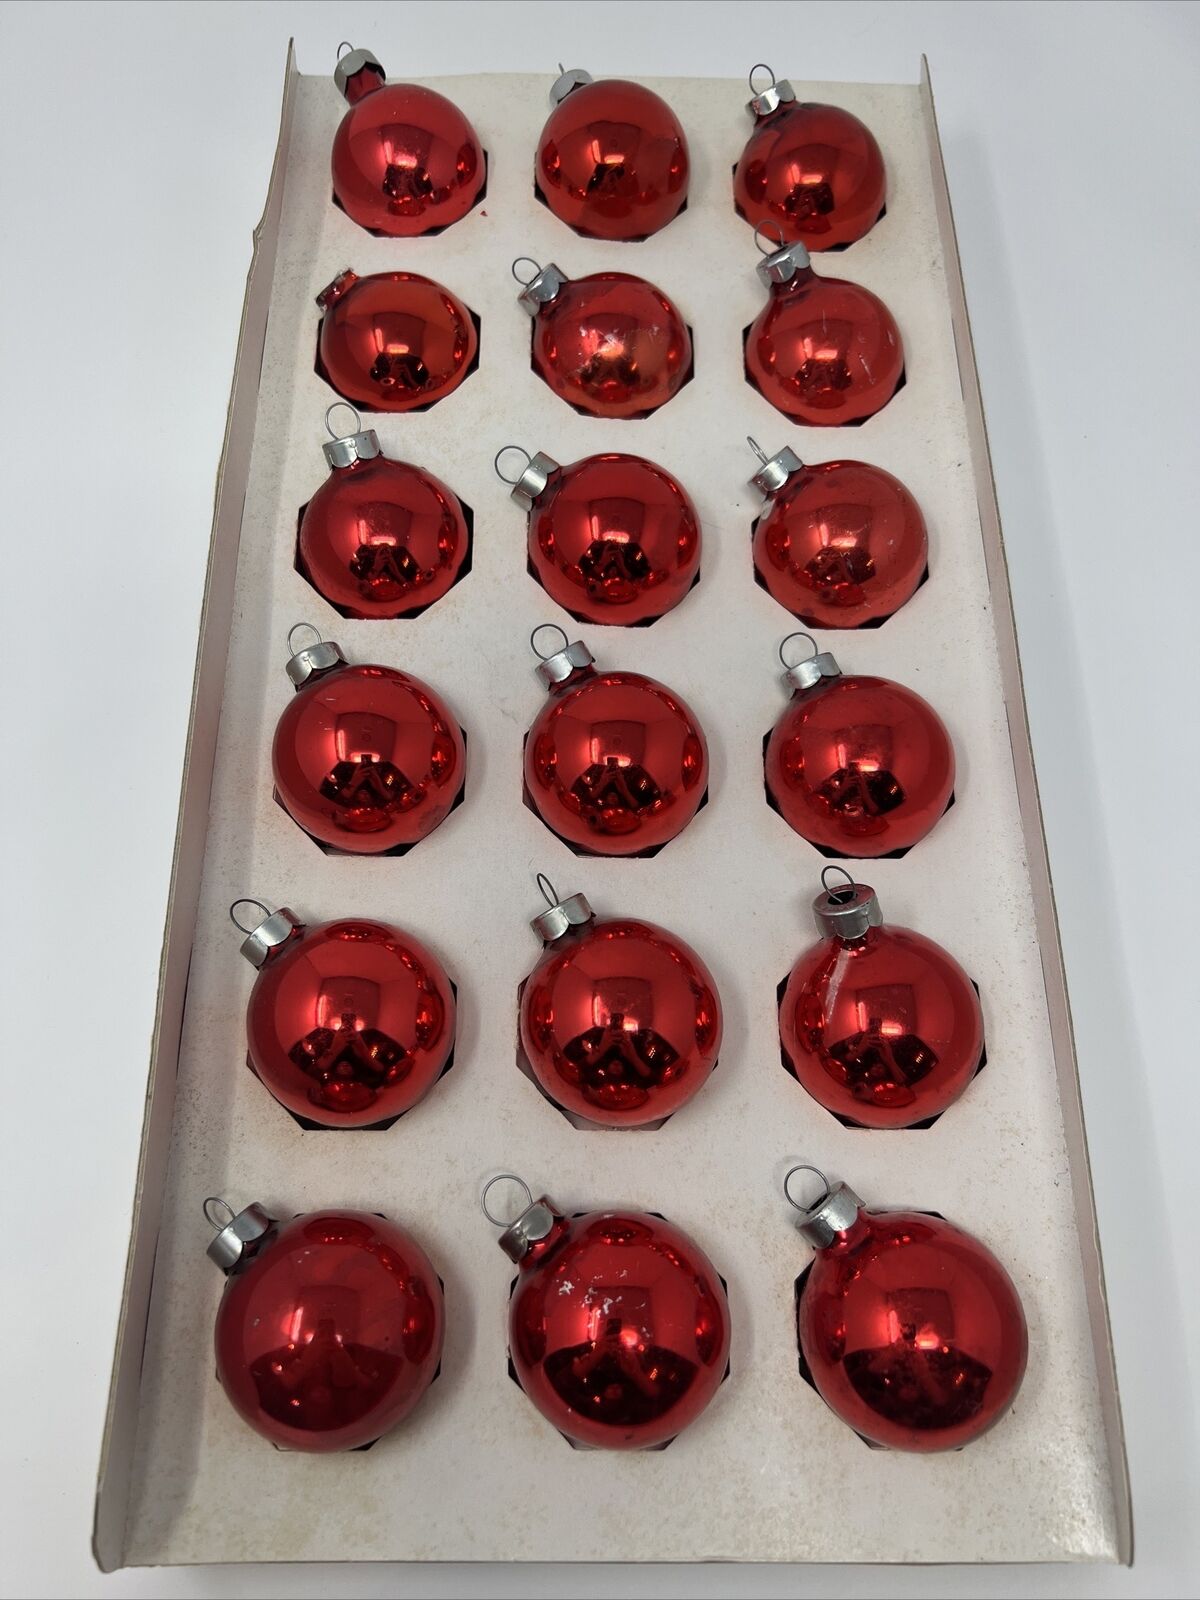 Lot of 18 Red Shiny Glass Ball Christmas Ornaments Made in U.S.A. Rauch